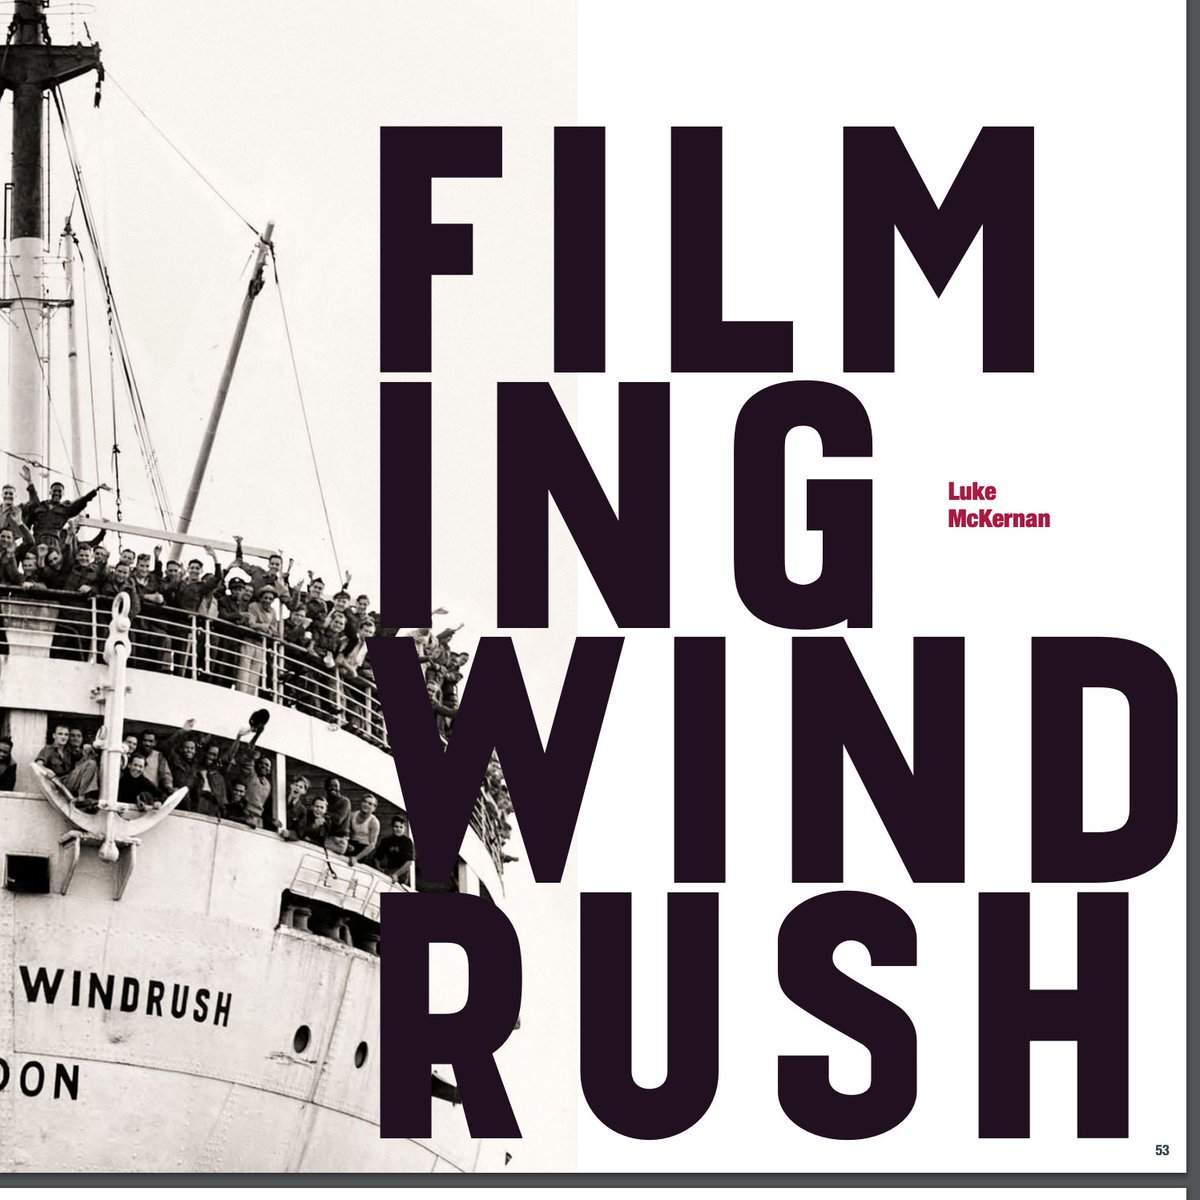 WE have a unique angle on the Windrush and tell the untold story behind the filming of the iconis footage of the HMS Windrush arrival and the lessons it holds for us with regards to media diversity today by Luke McKernan (@lukemckernan)